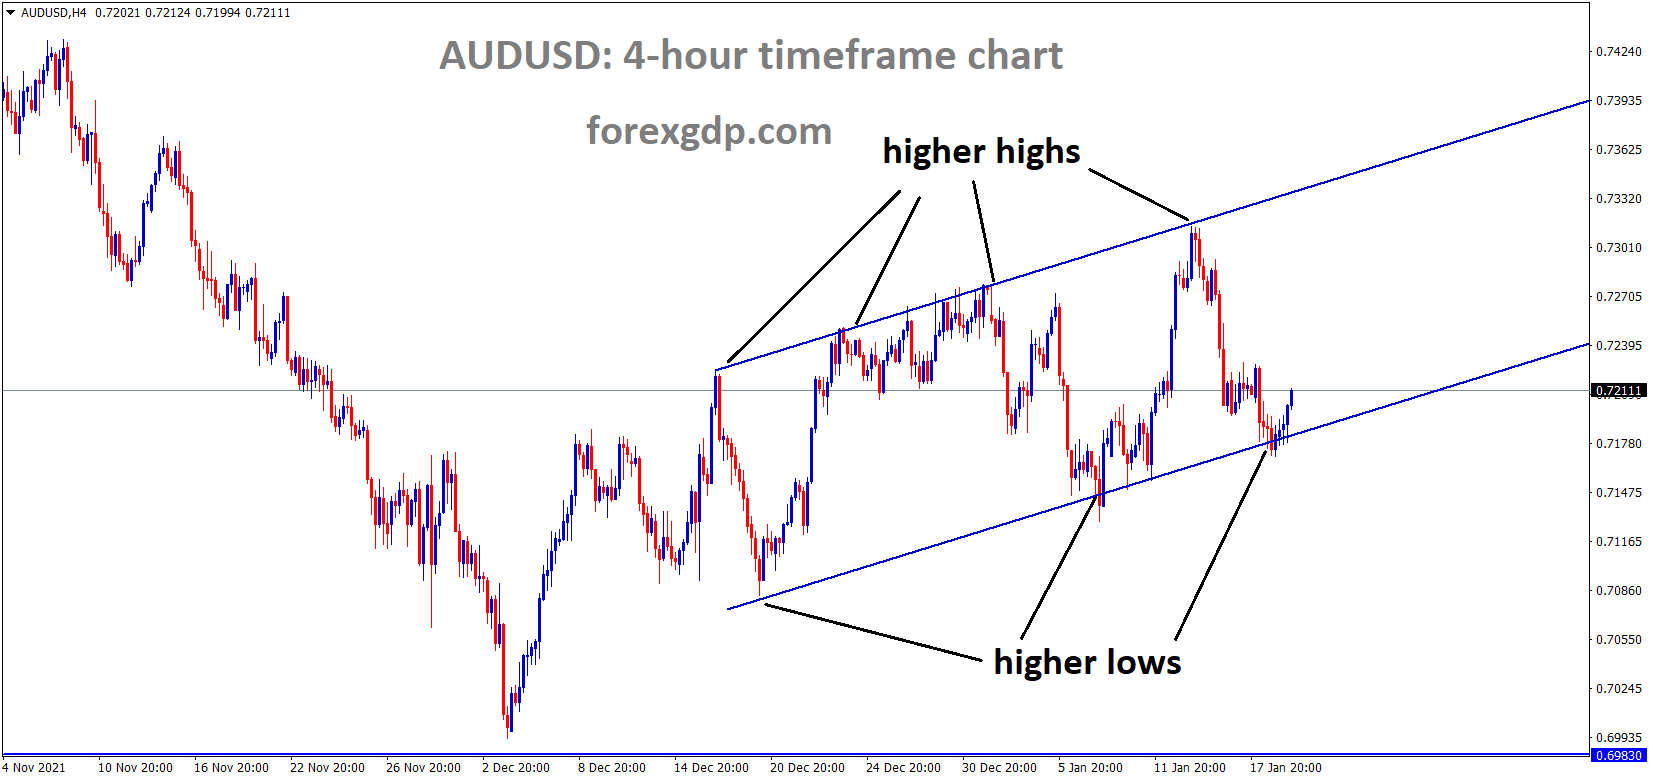 AUDUSD is moving in an Ascending channel and the market has rebounded from the higher low area of the Ascending channel